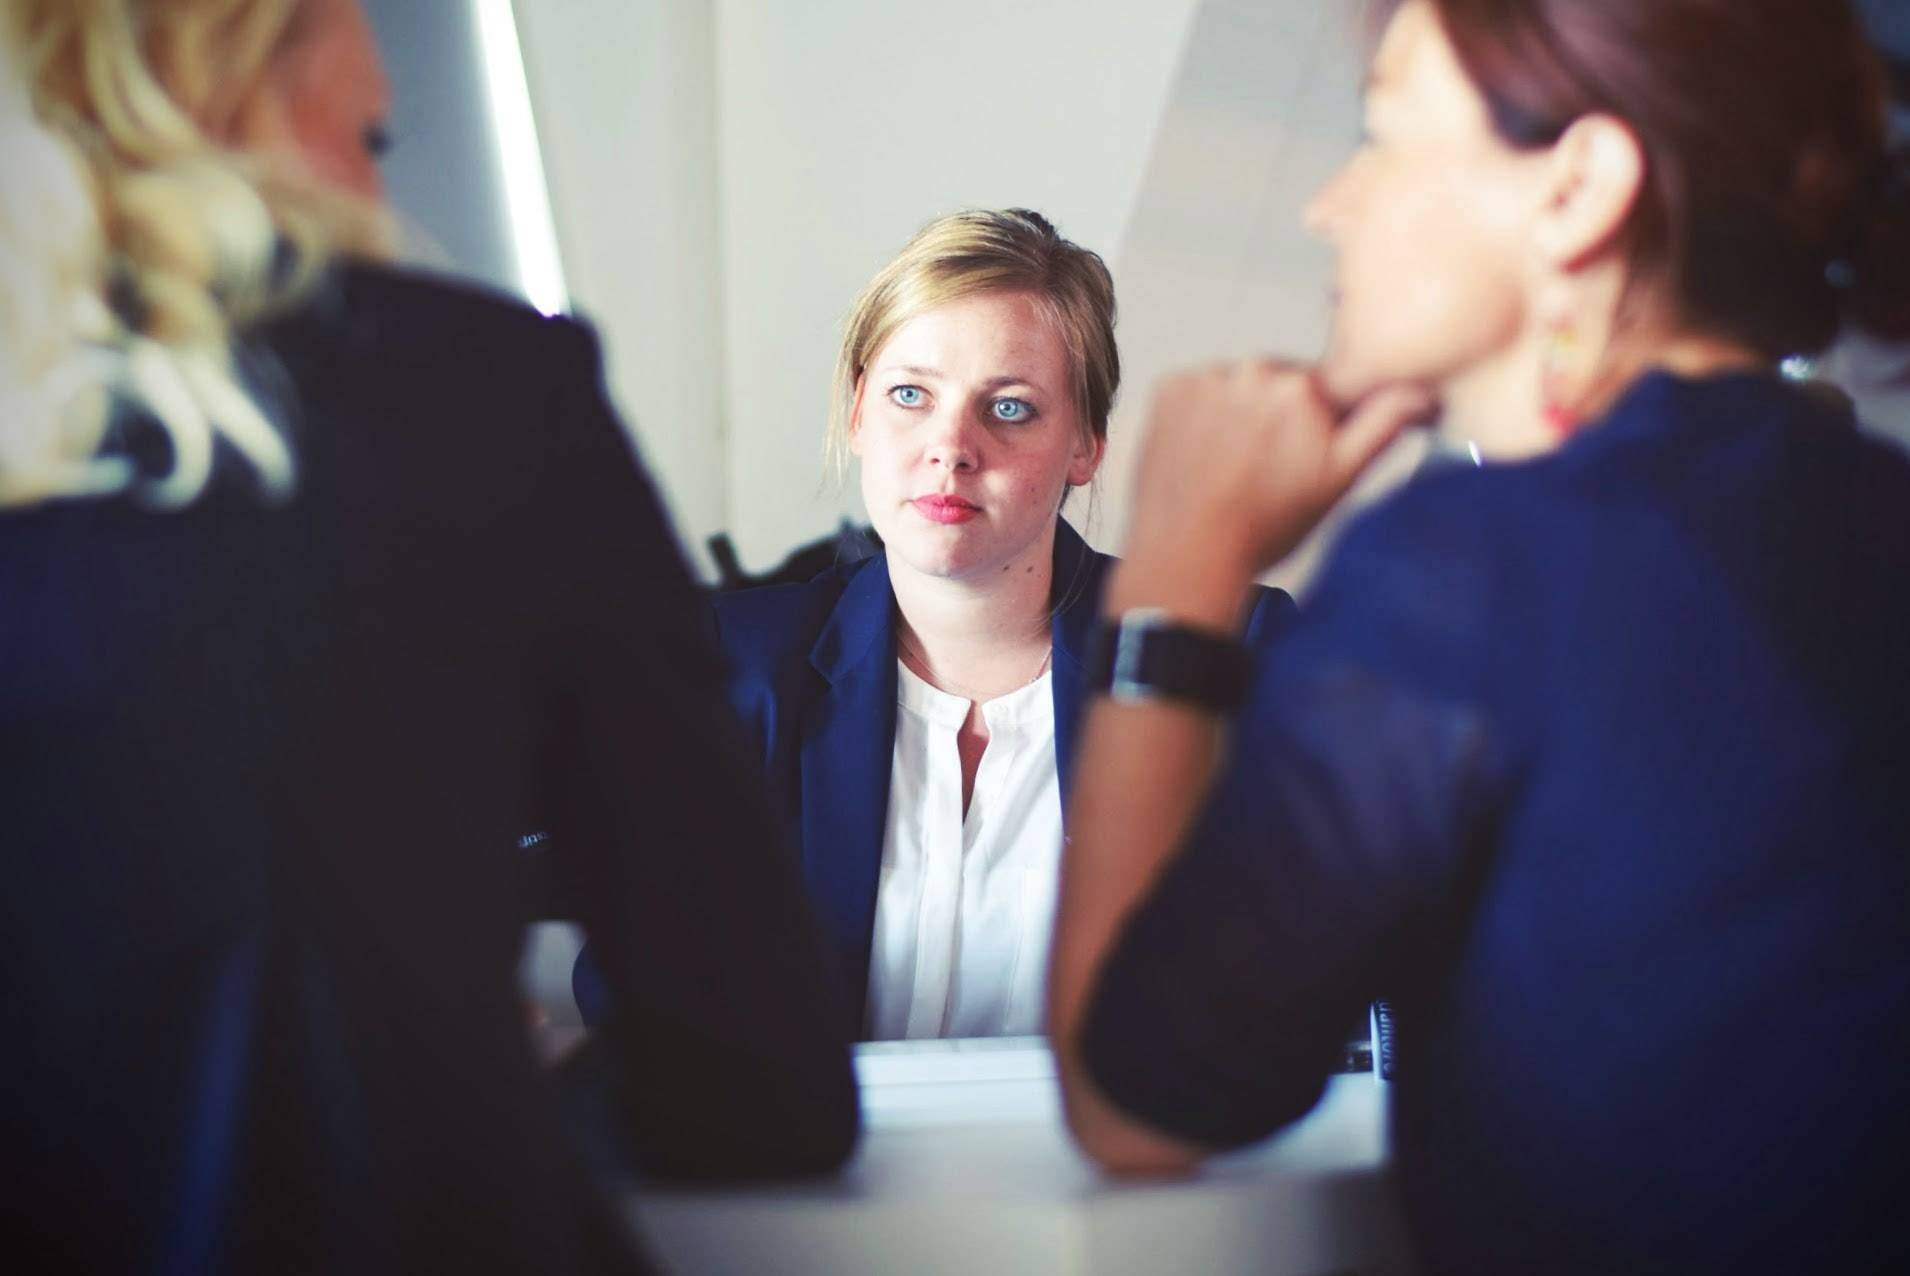 Dealing with Difficult People: Communication Styles and Conflict Resolution